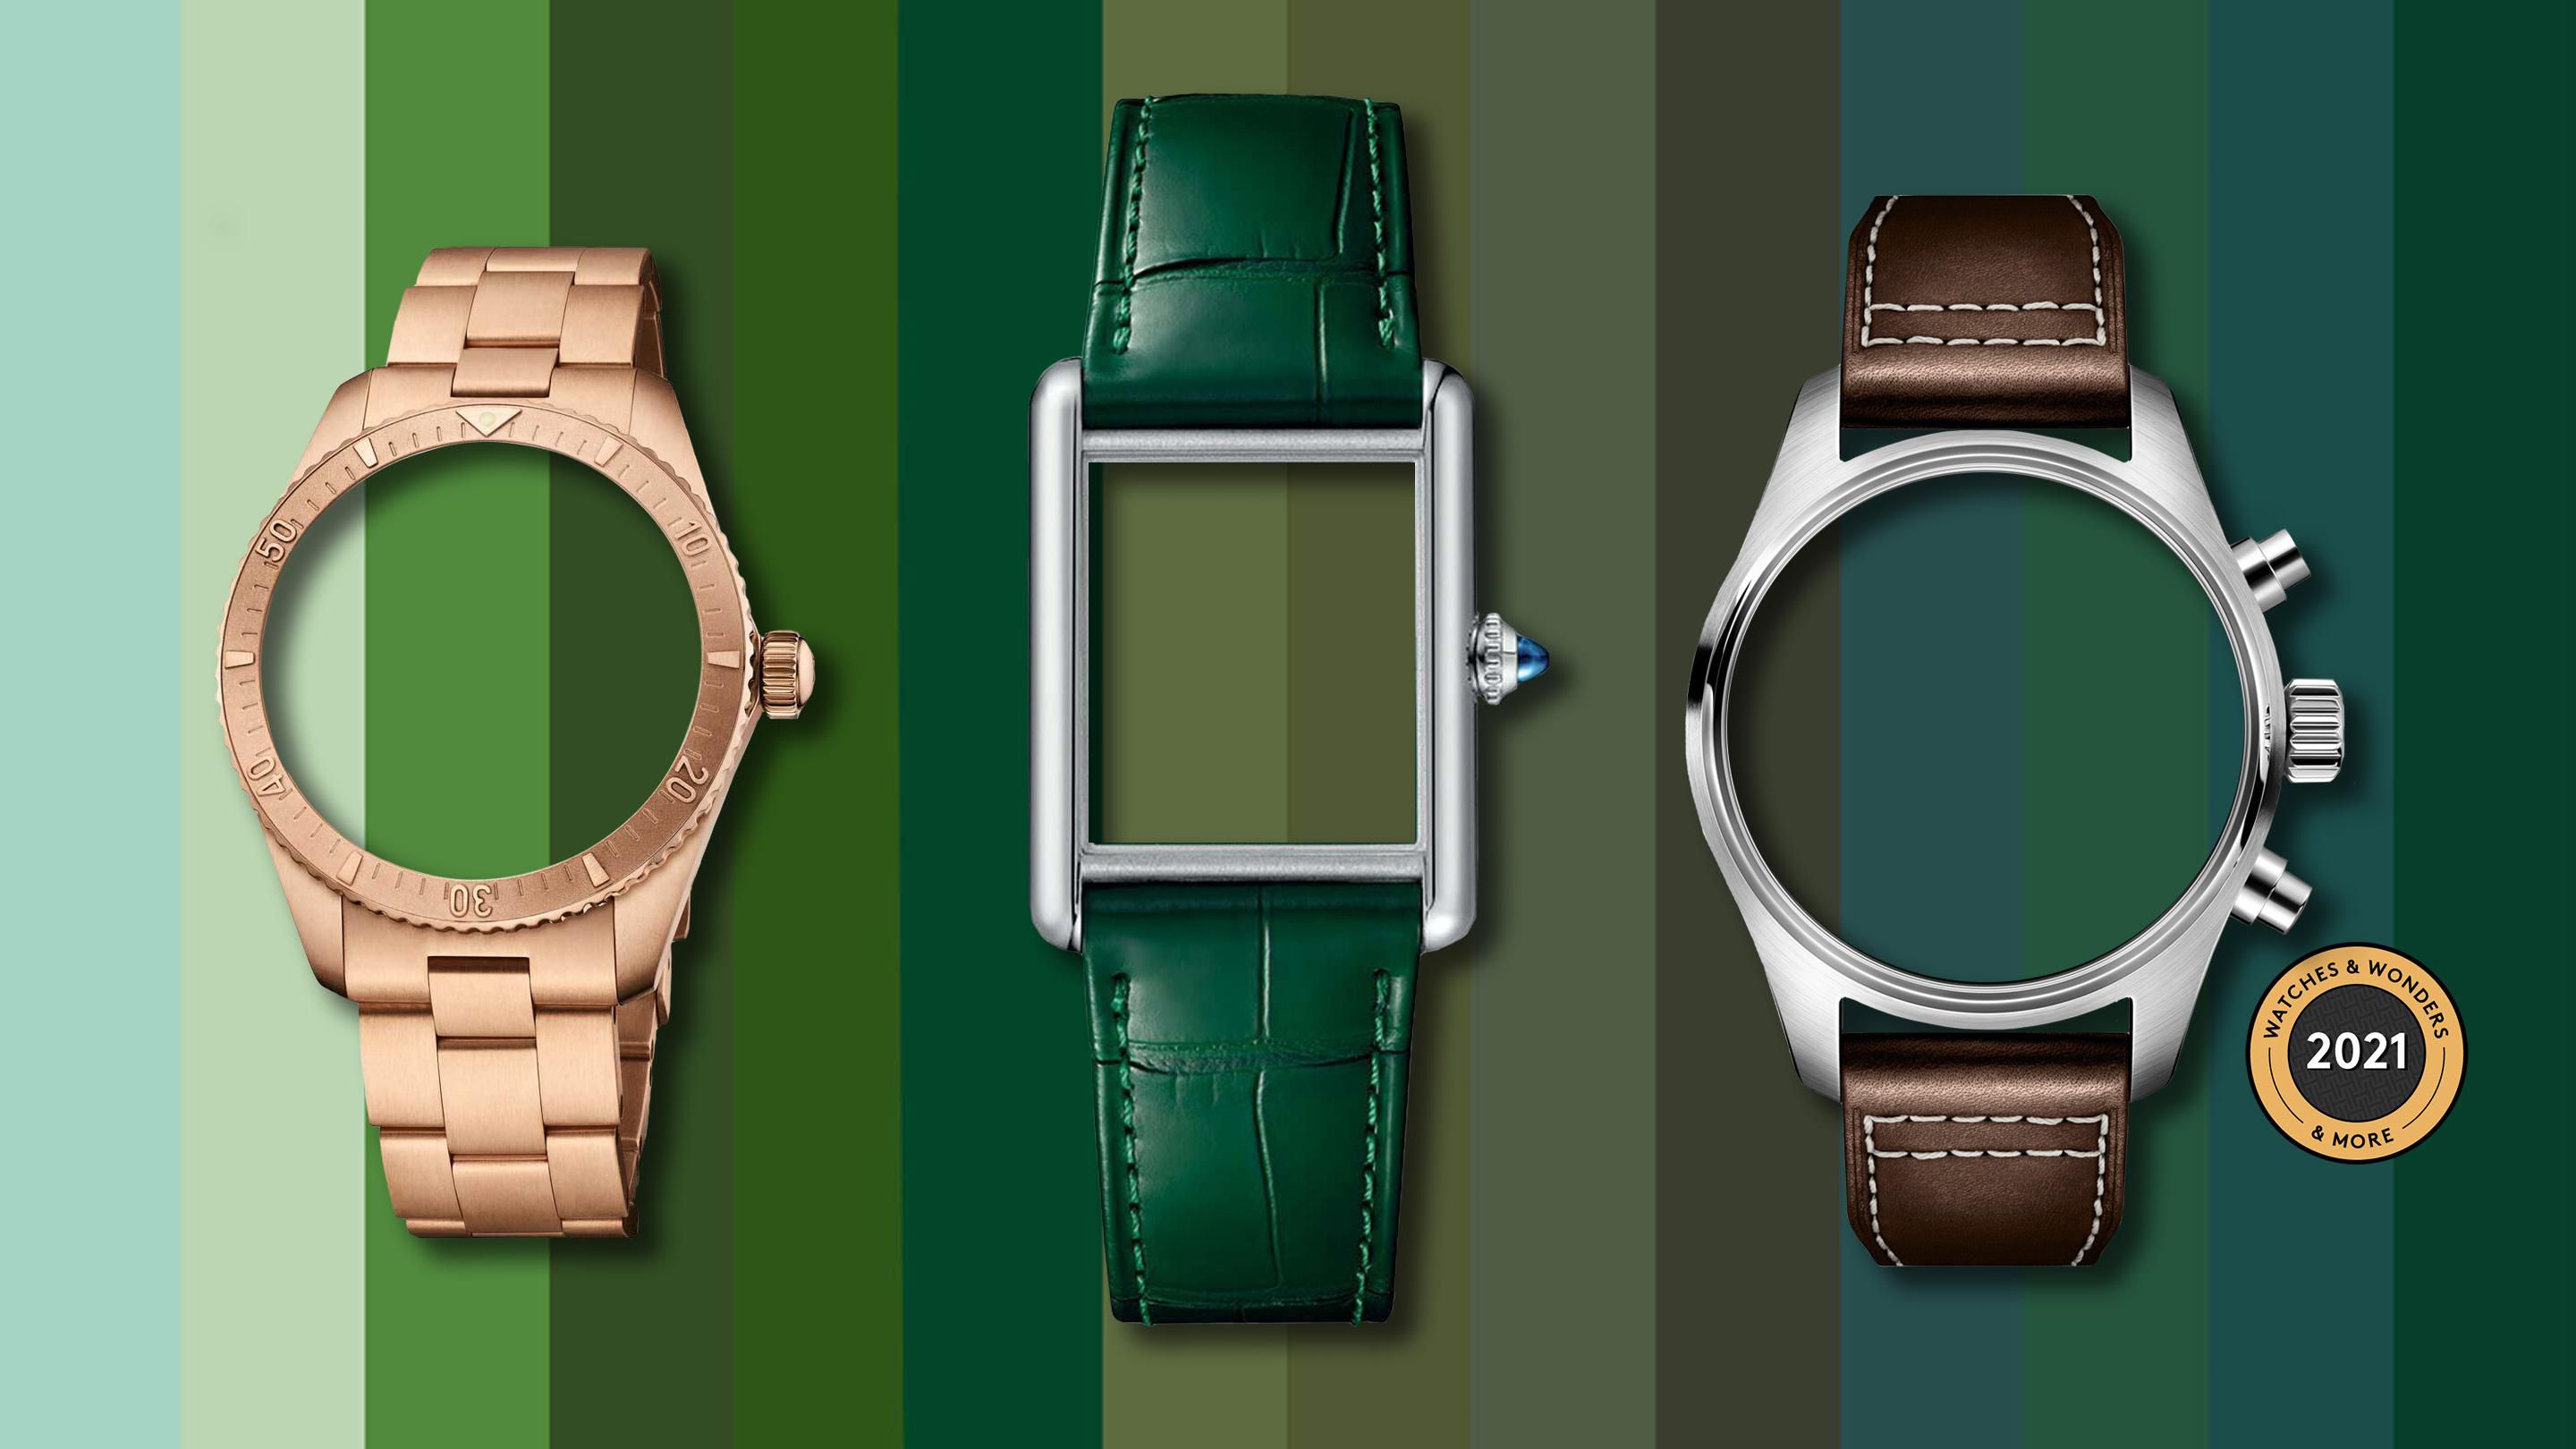 The hot watch colour for spring? Green